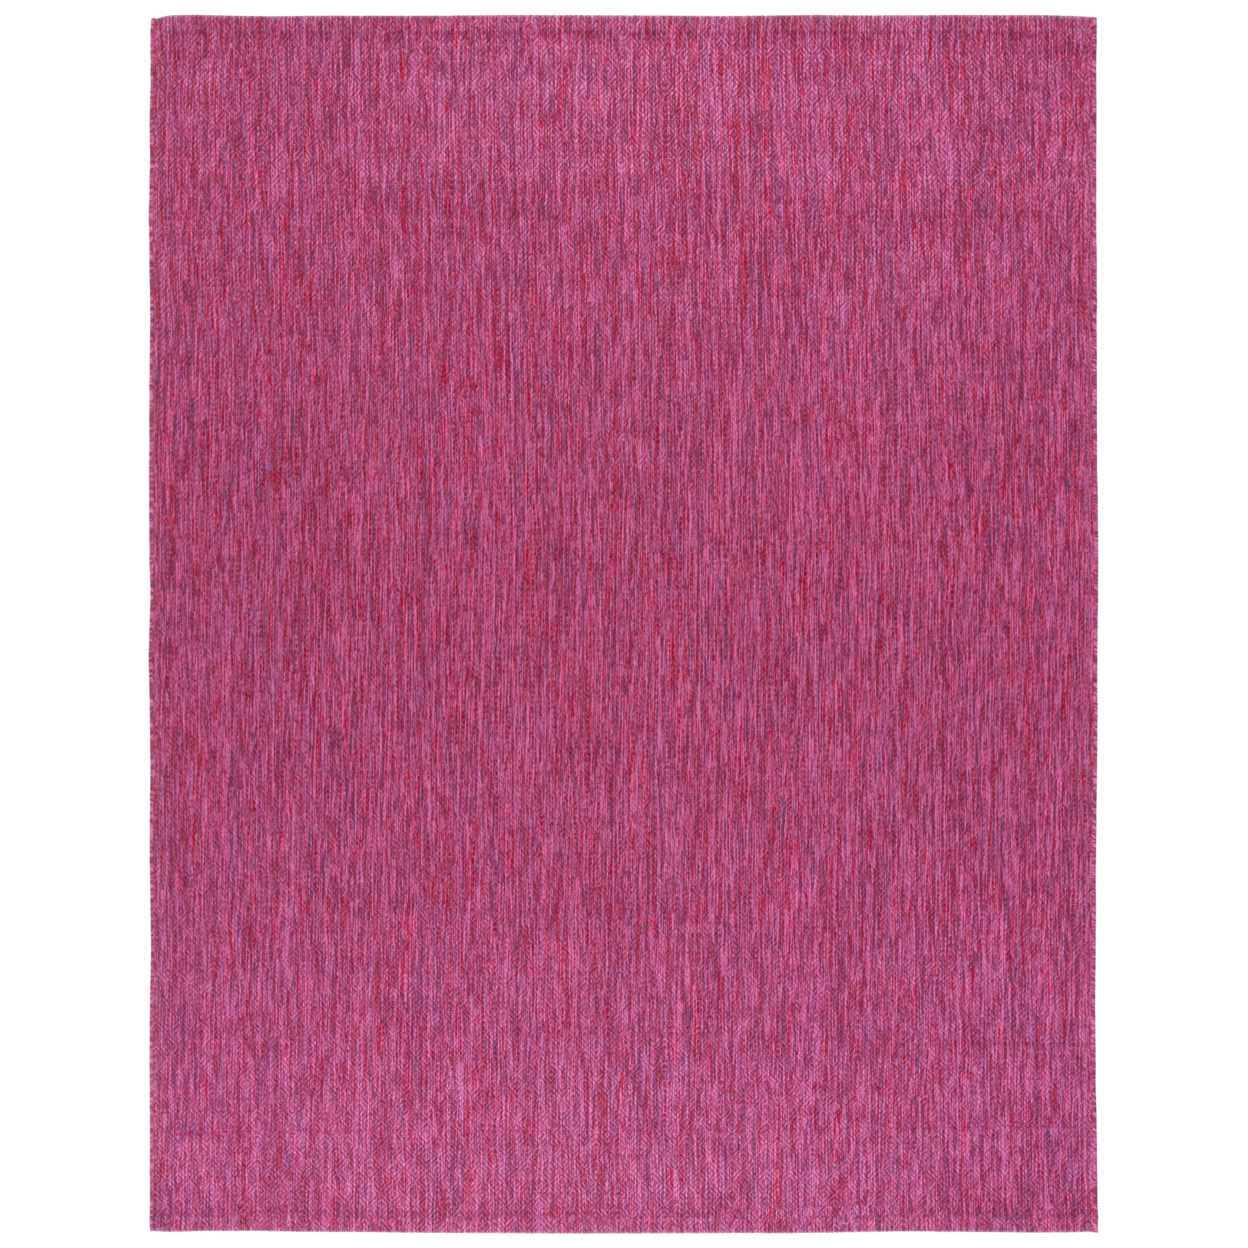 SAFAVIEH Outdoor CY8520-55922 Courtyard Collection Red Rug - 9' X 12'